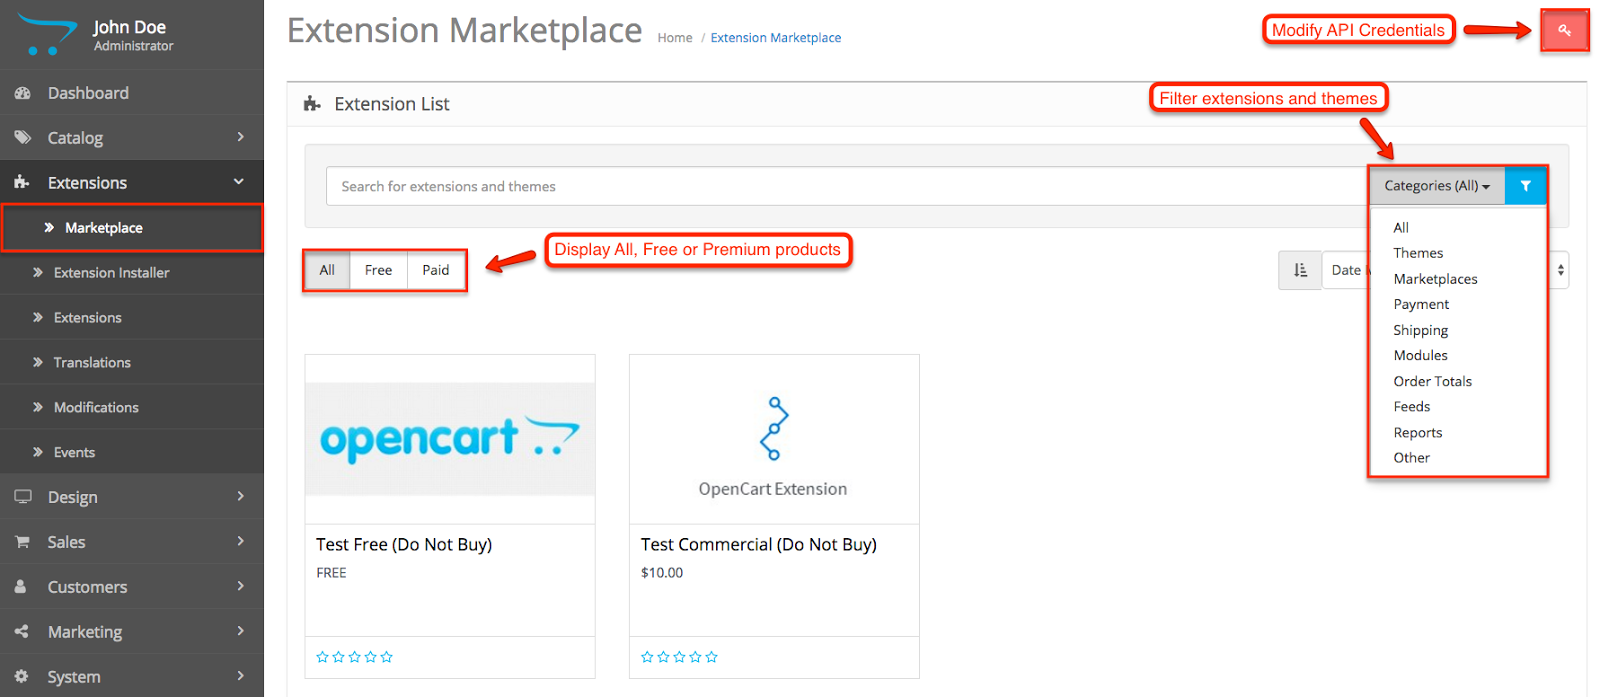 OpenCart Version 3.0.0.0 Available to Download Now